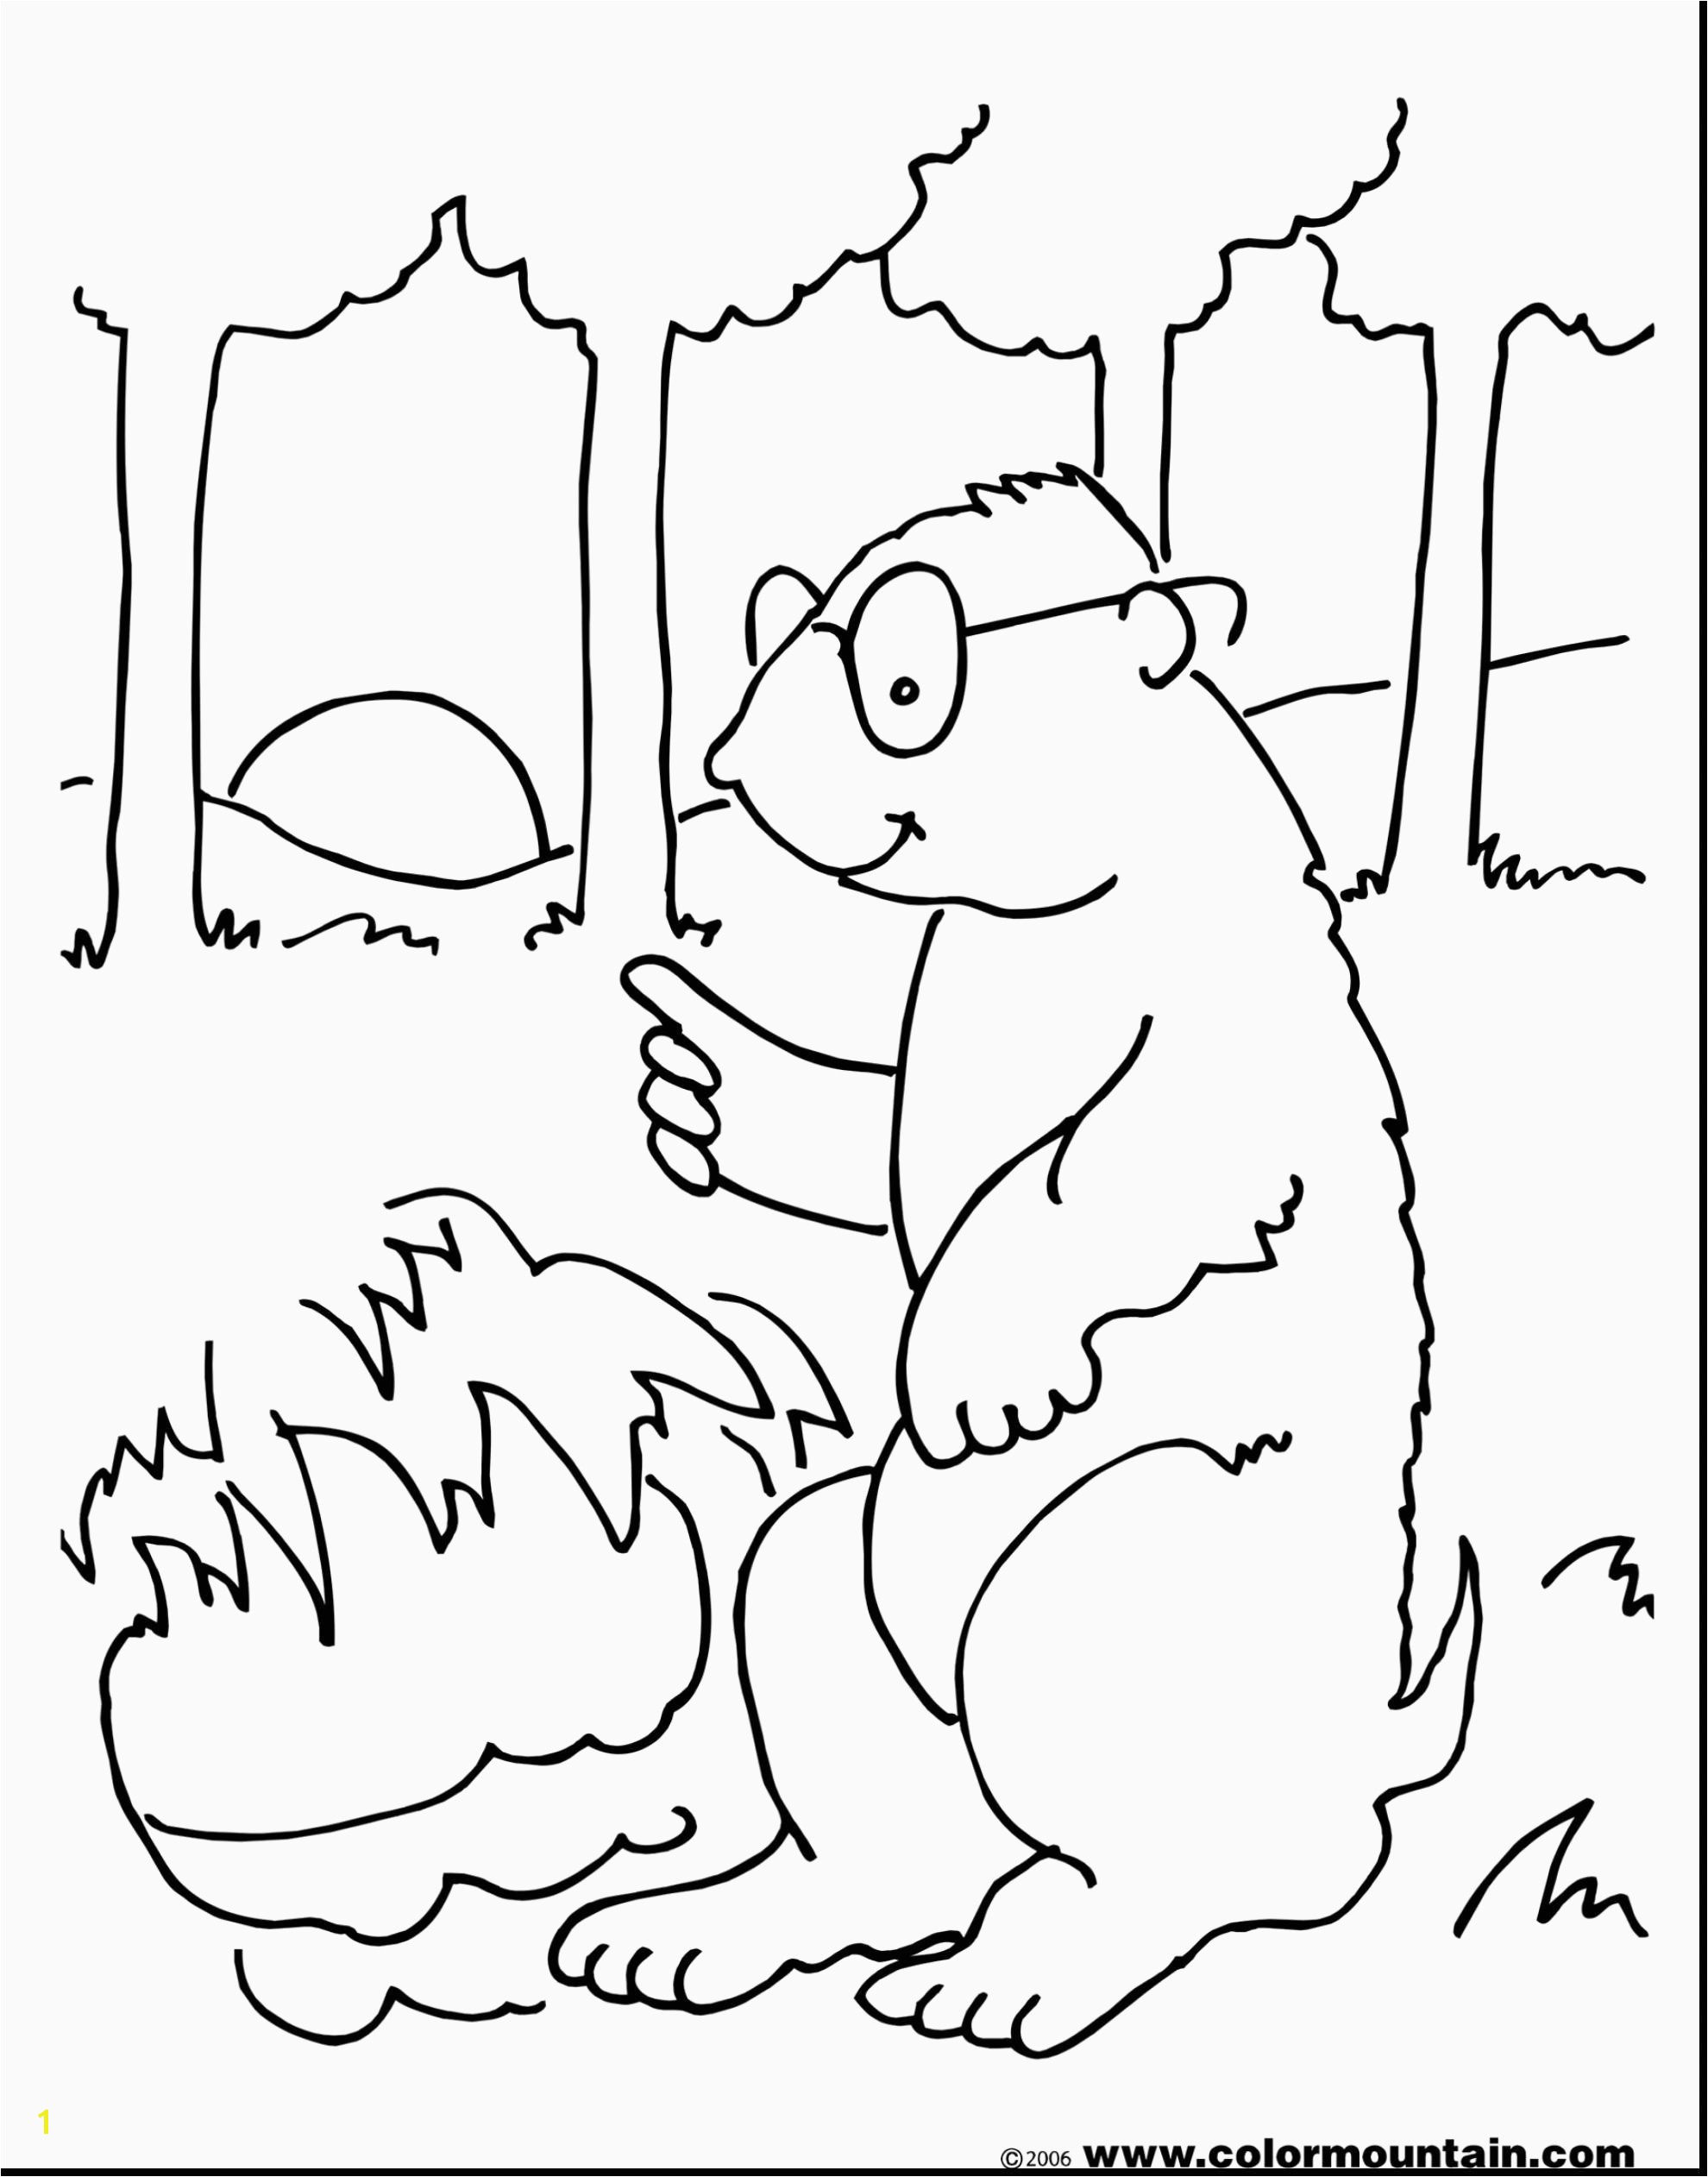 Orlando Magic Coloring Pages Best Full Groundhog Day Coloring Pages Free Printab Unknown Image